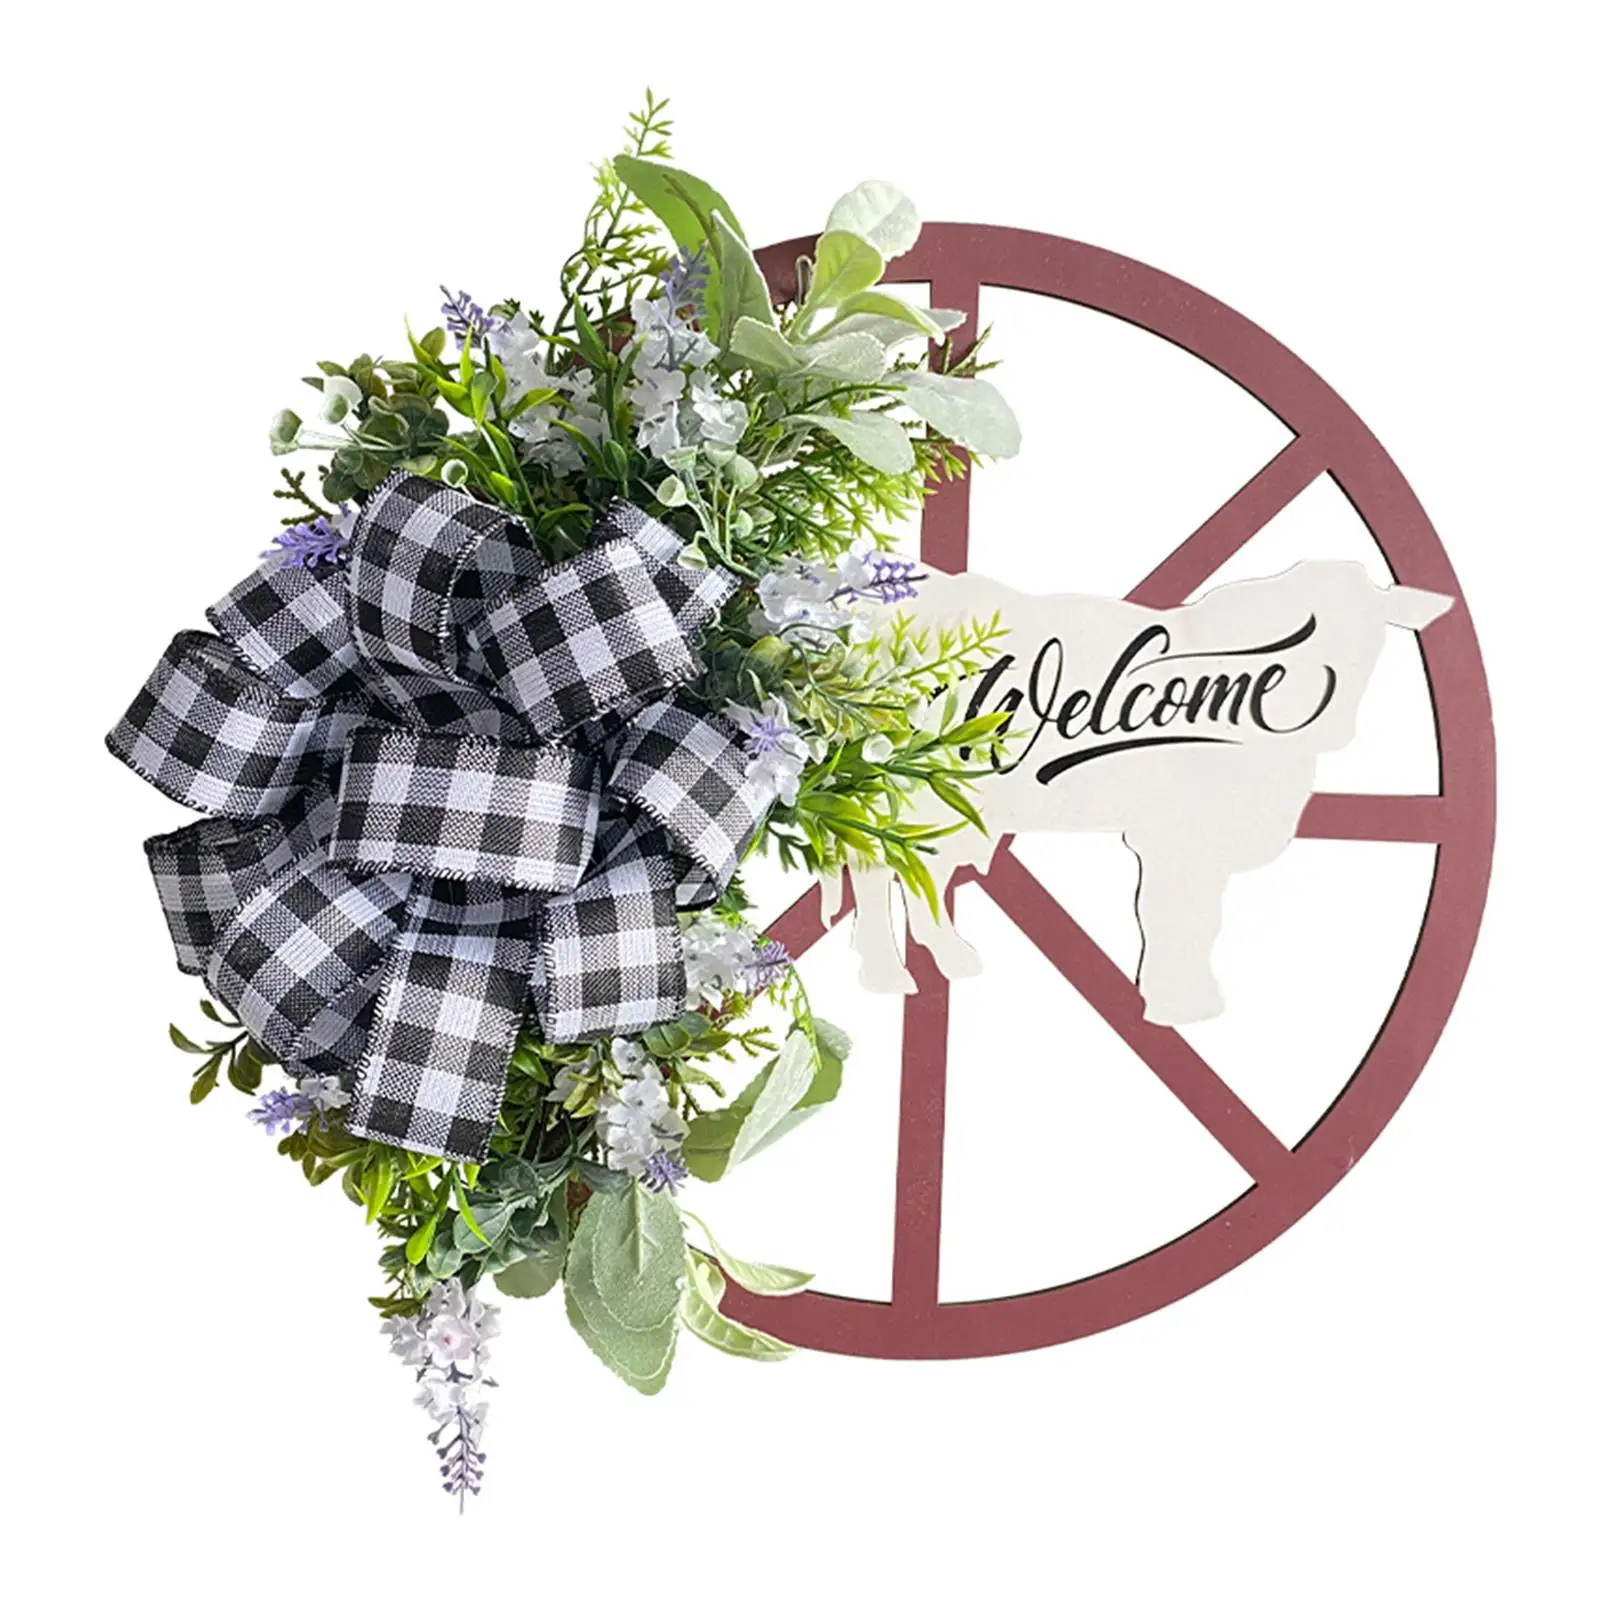 Wagon Wheel Wreath Hanging Decor Black White Plaid Bow Artificial Flower Wreath for Wall Fireplace Party Decor Holiday Home